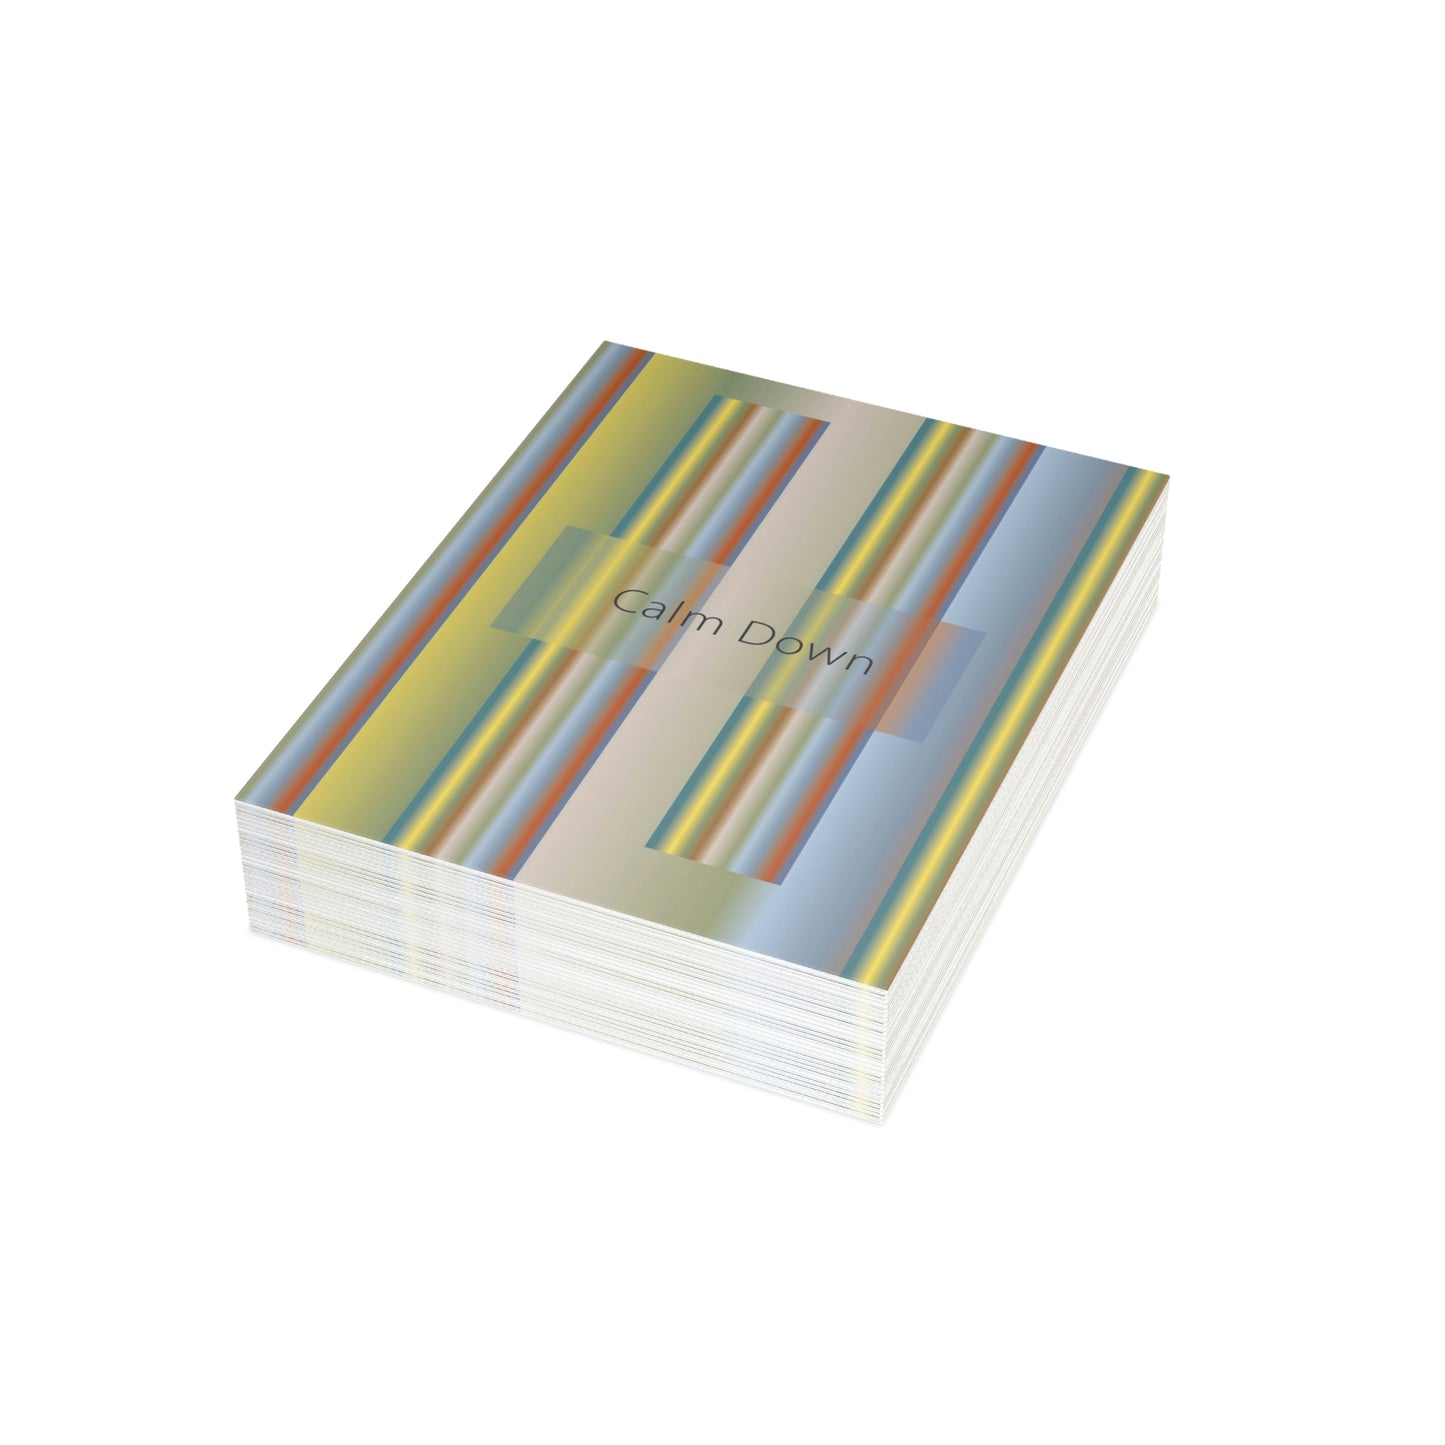 Folded Greeting Cards Vertical (1, 10, 30, and 50pcs) Calm Down - Design No.200